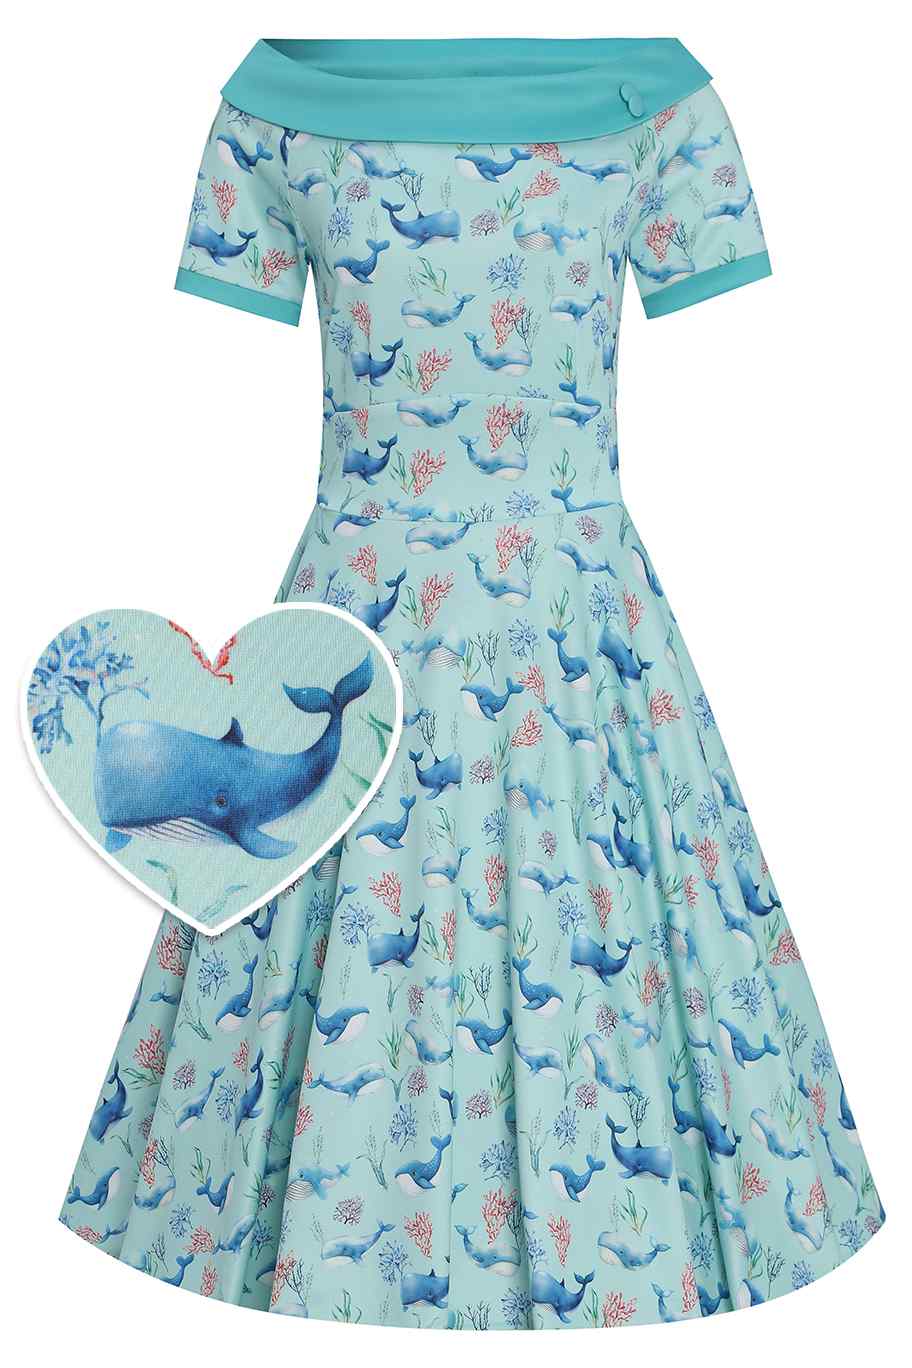 Front View of Whale Print Swing Dress in Baby Blue